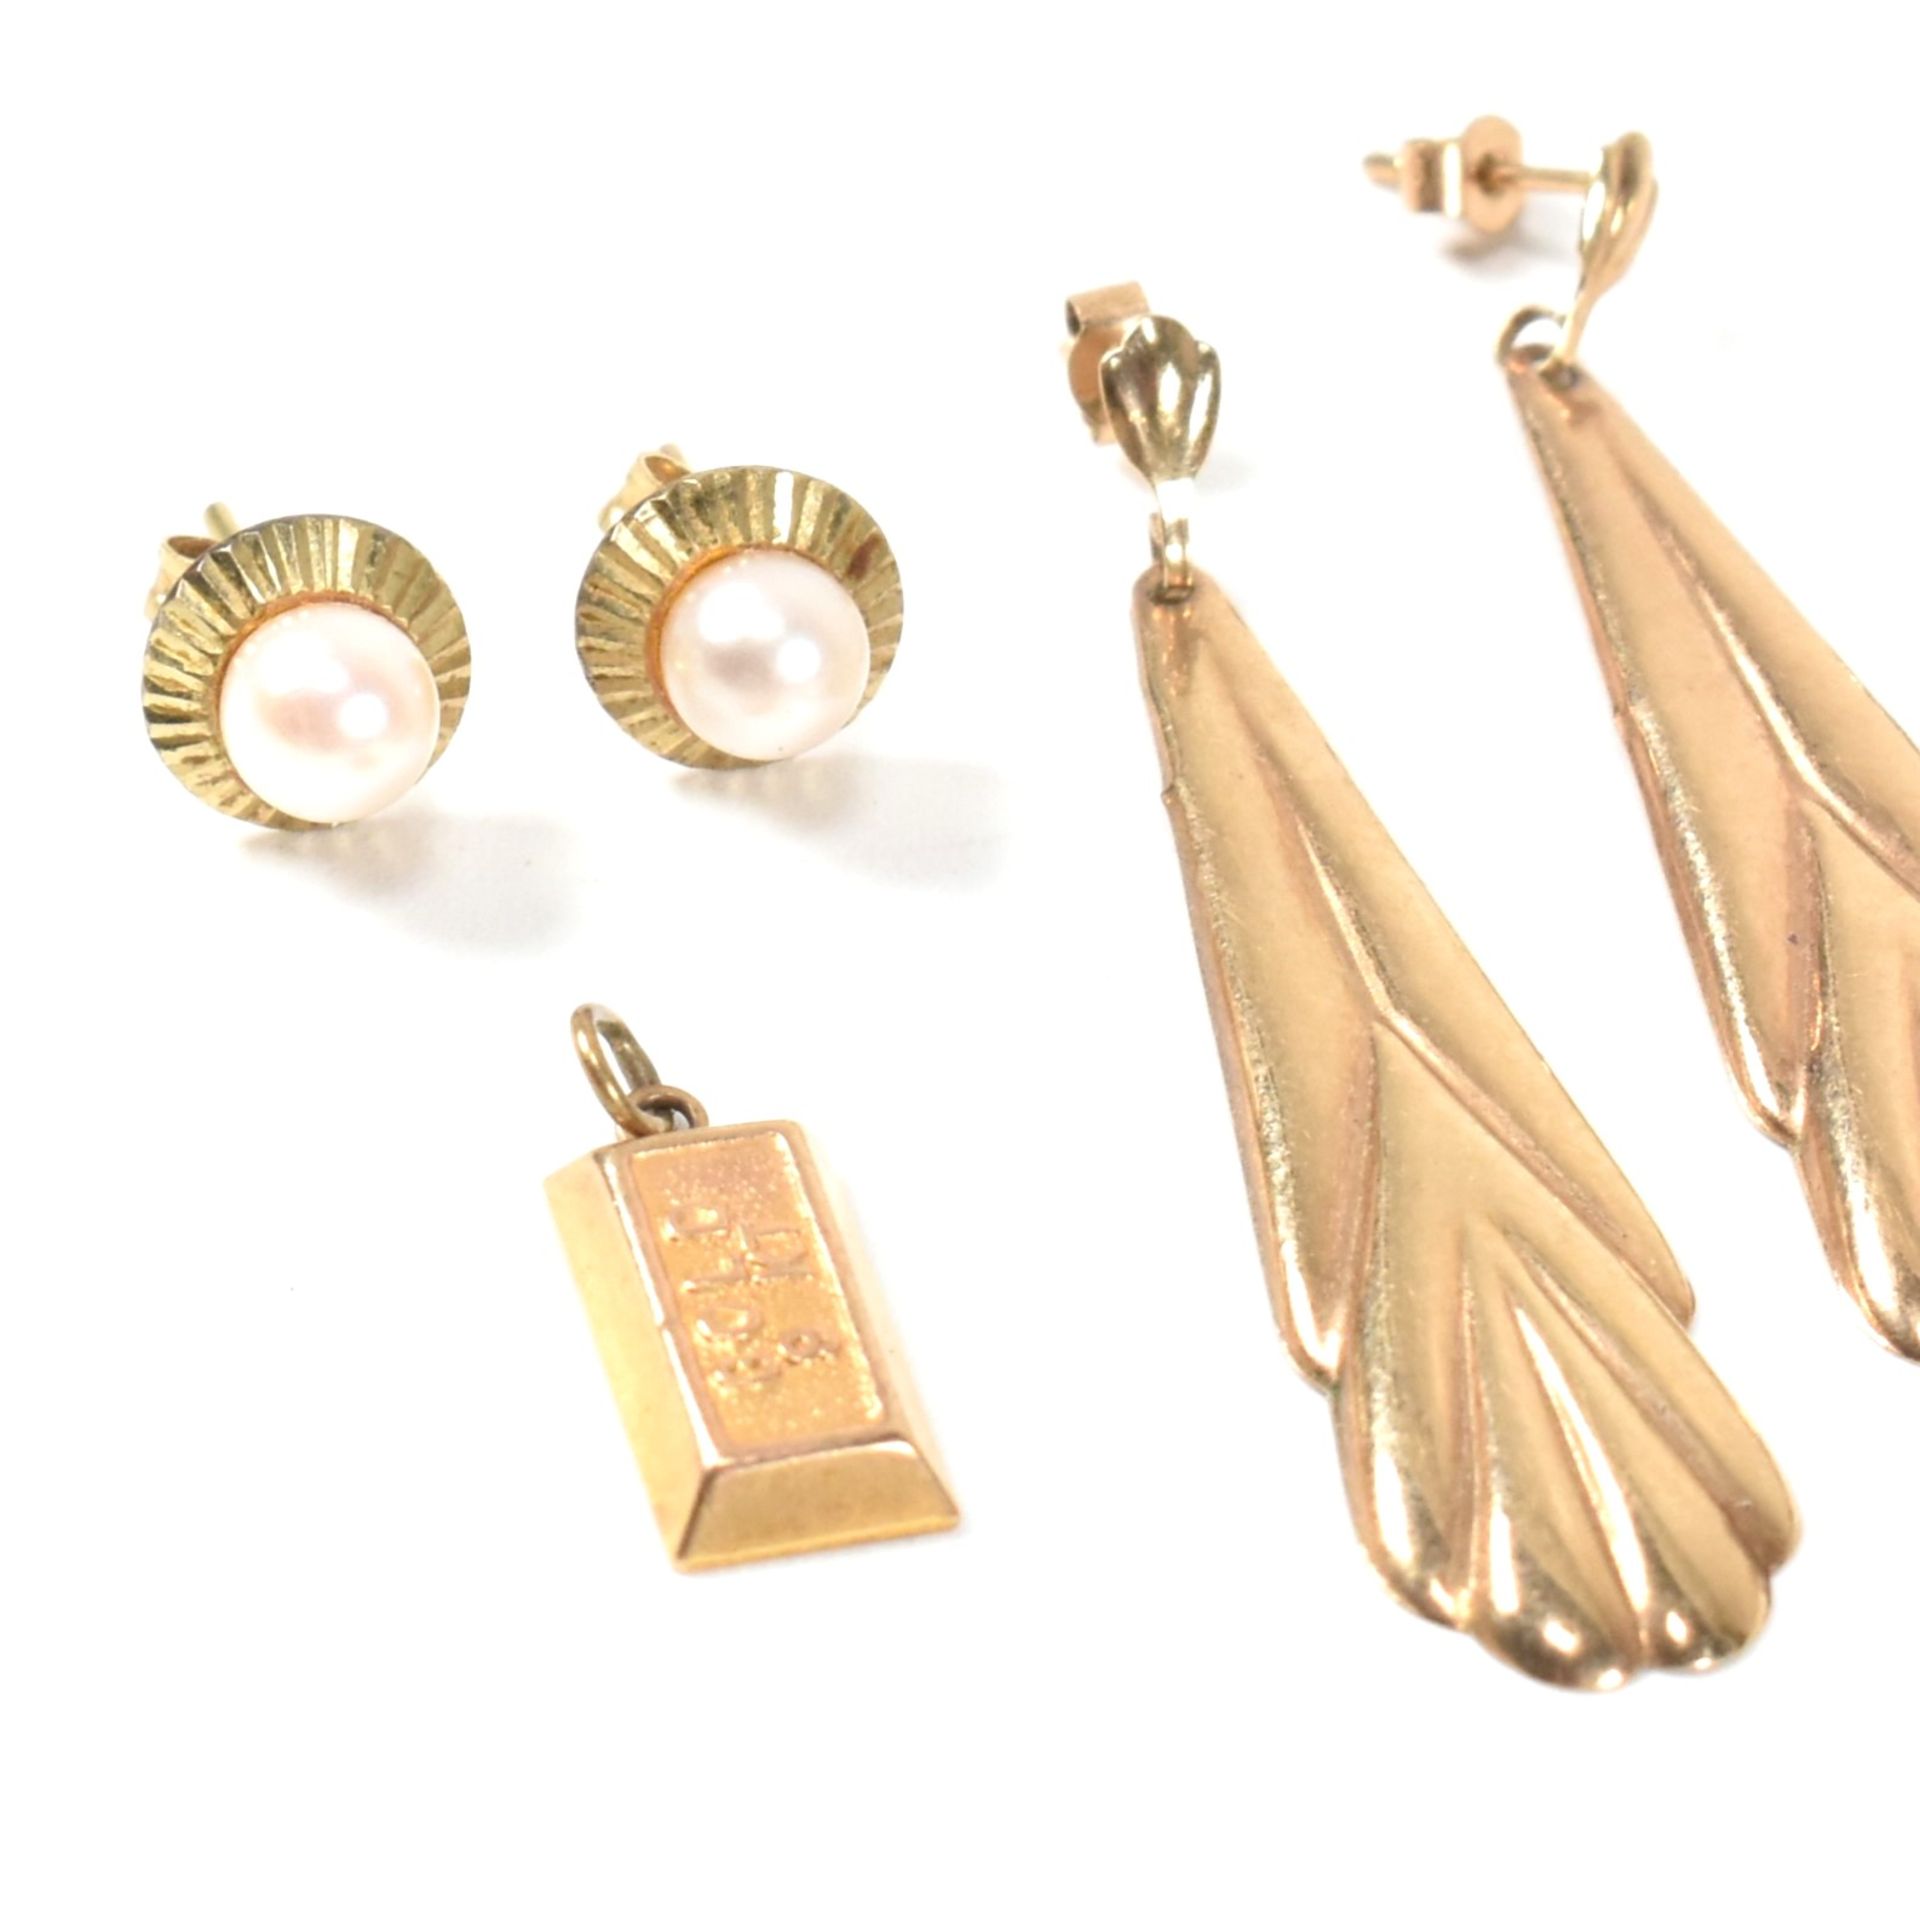 COLLECTION OF 9CT GOLD EARRINGS & NECKLACE PENDANT - Image 4 of 4